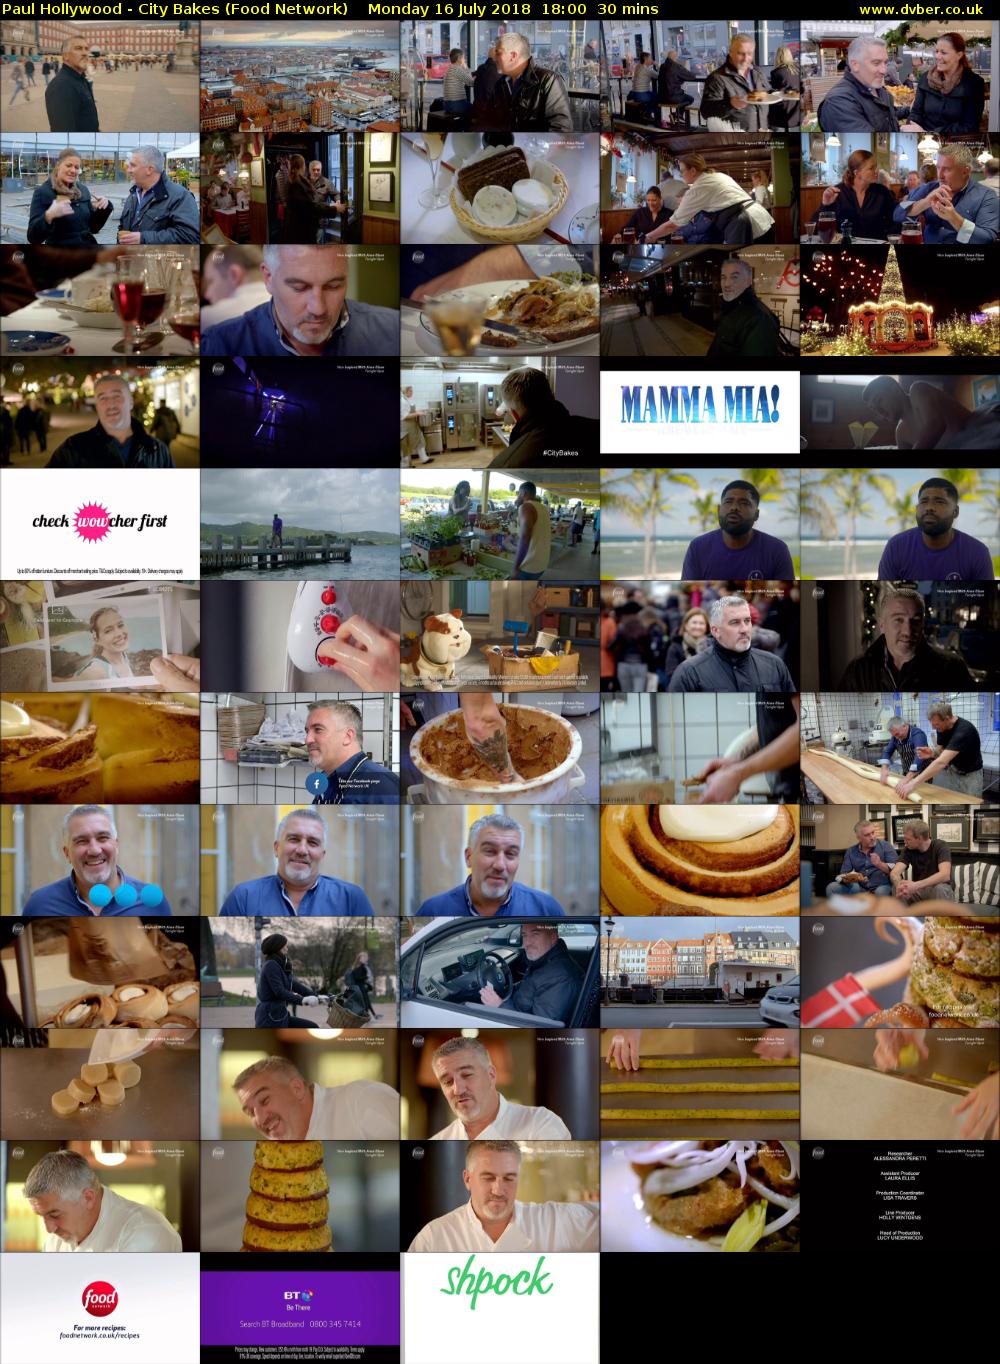 Paul Hollywood - City Bakes (Food Network) Monday 16 July 2018 18:00 - 18:30